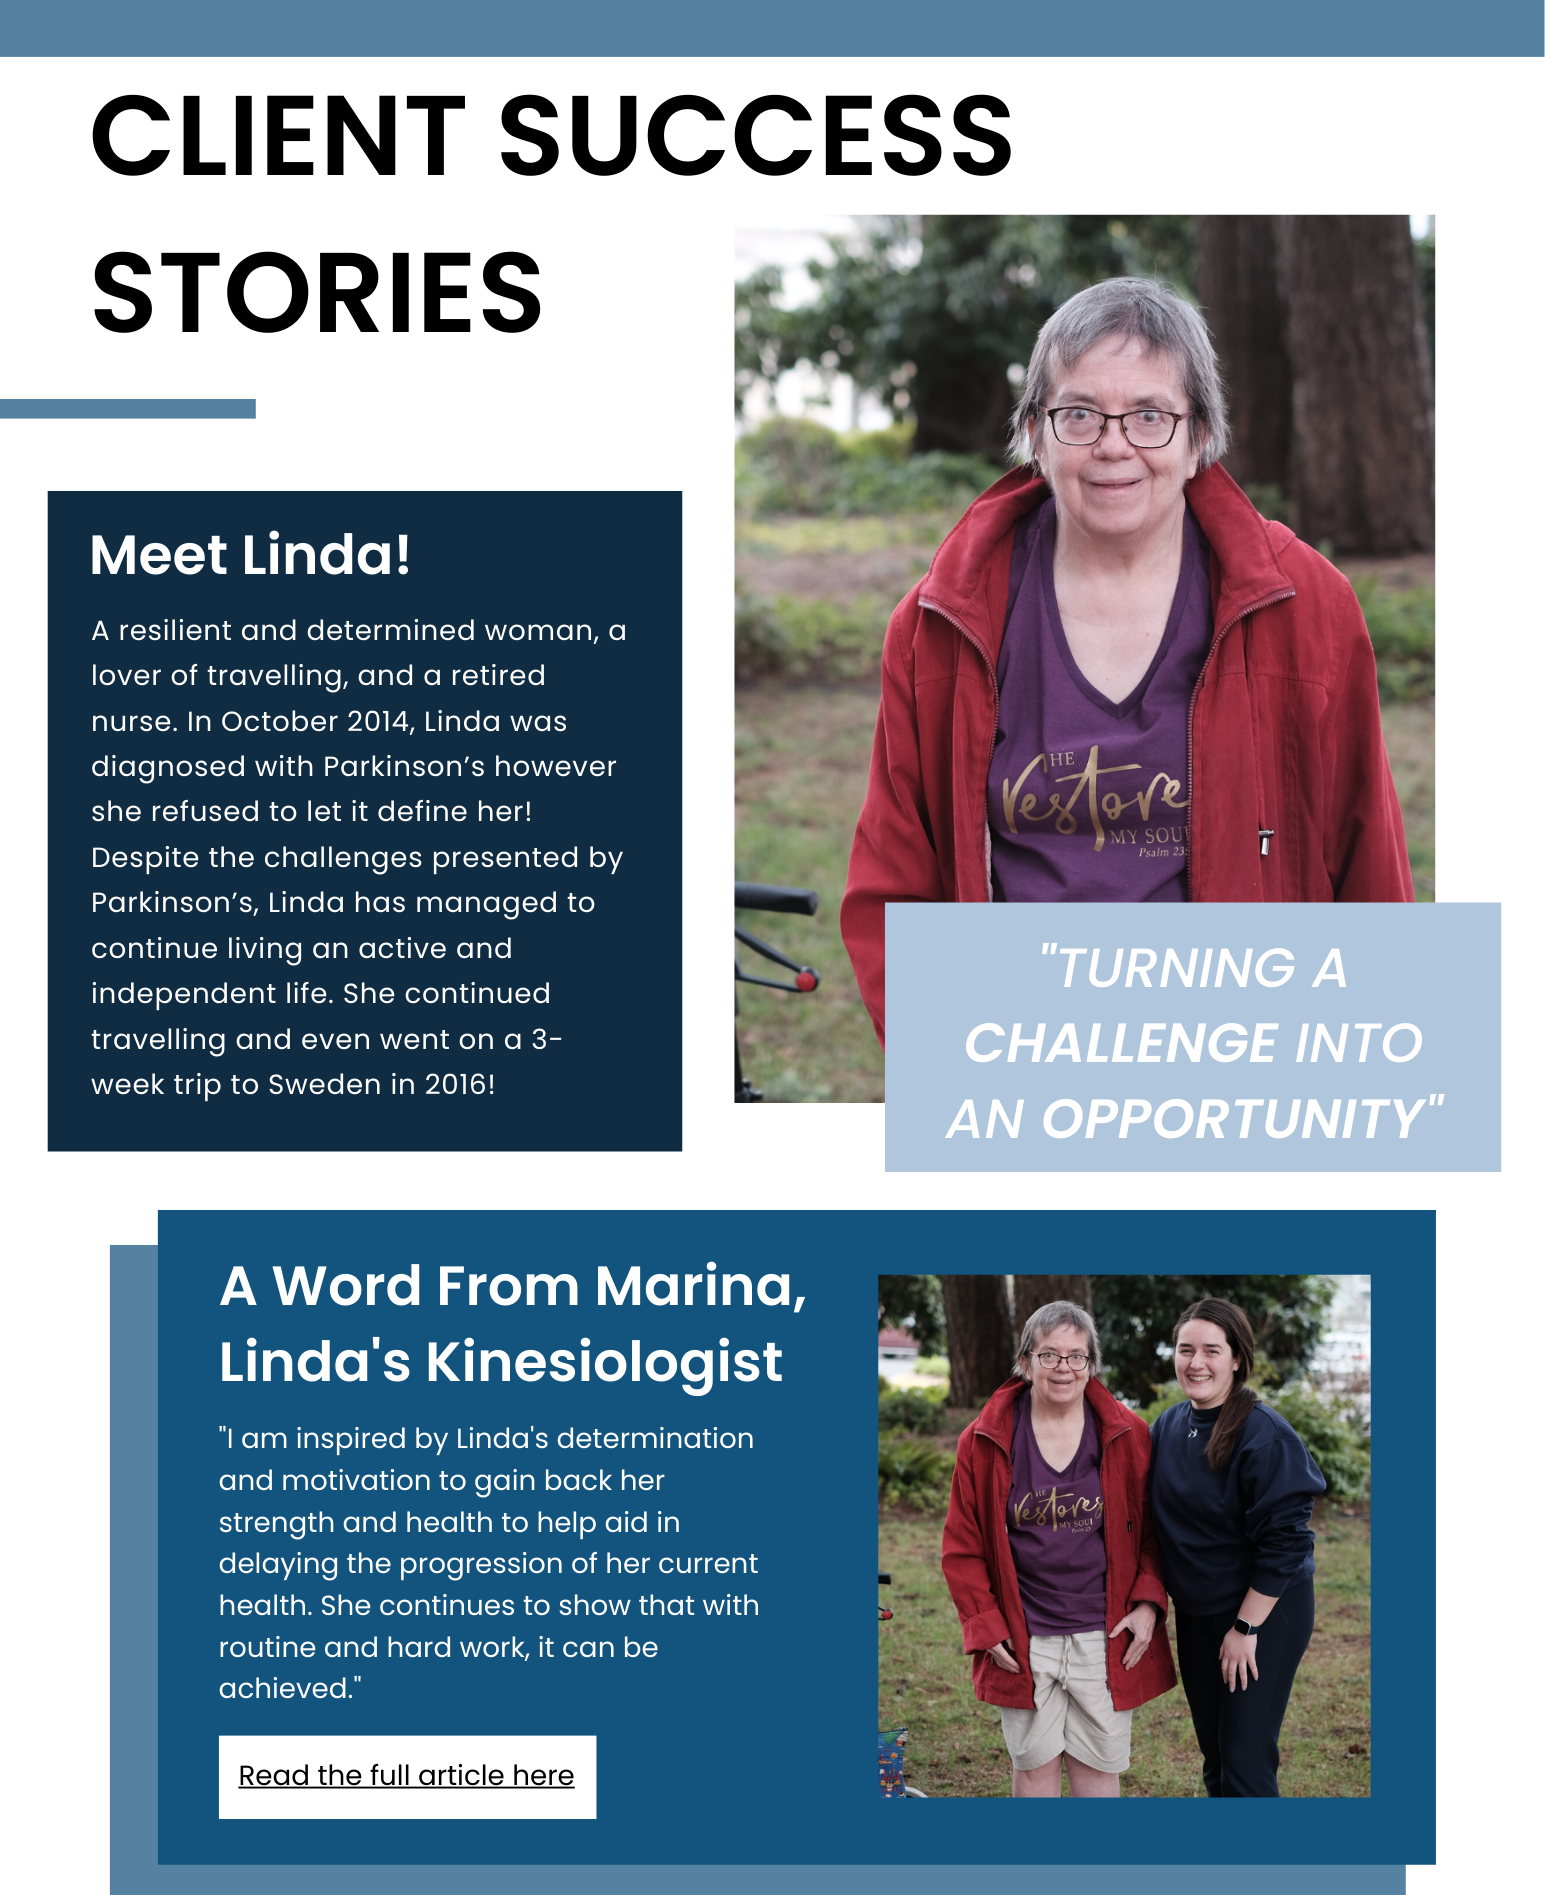 Client success stories. Meet Linda! A resilient and determined woman, a lover of travelling, and a retired nurse. In October 2014, Linda was diagnosed with Parkinson’s however she refused to let it define her! Despite the challenges presented by Parkinson’s, Linda has managed to continue living an active and independent life. She continued travelling and even went on a 3-week trip to Sweden in 2016! "turning a challenge into an opportunity" A Word From Marina, Linda's Kinesiologist "I am inspired by Linda's determination and motivation to gain back her strength and health to help aid in delaying the progression of her current health. She continues to show that with routine and hard work, it can be achieved."